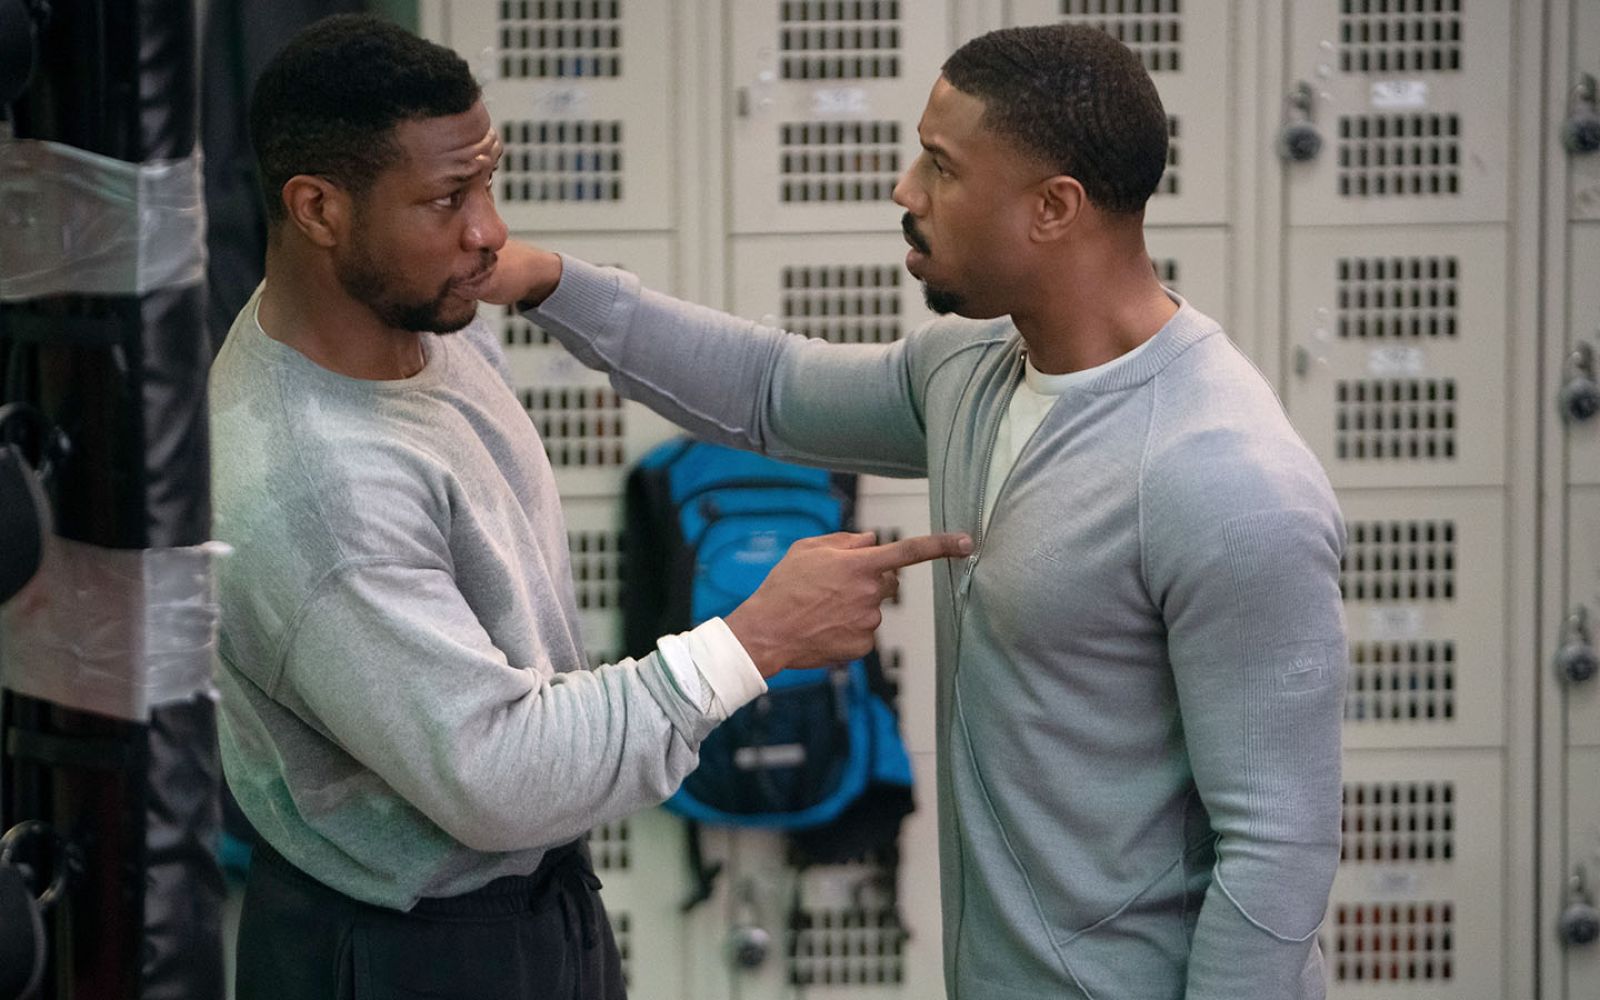 Jonathan Majors, left, and Michael B. Jordan star in the No. 1 movie in the country, Creed III.